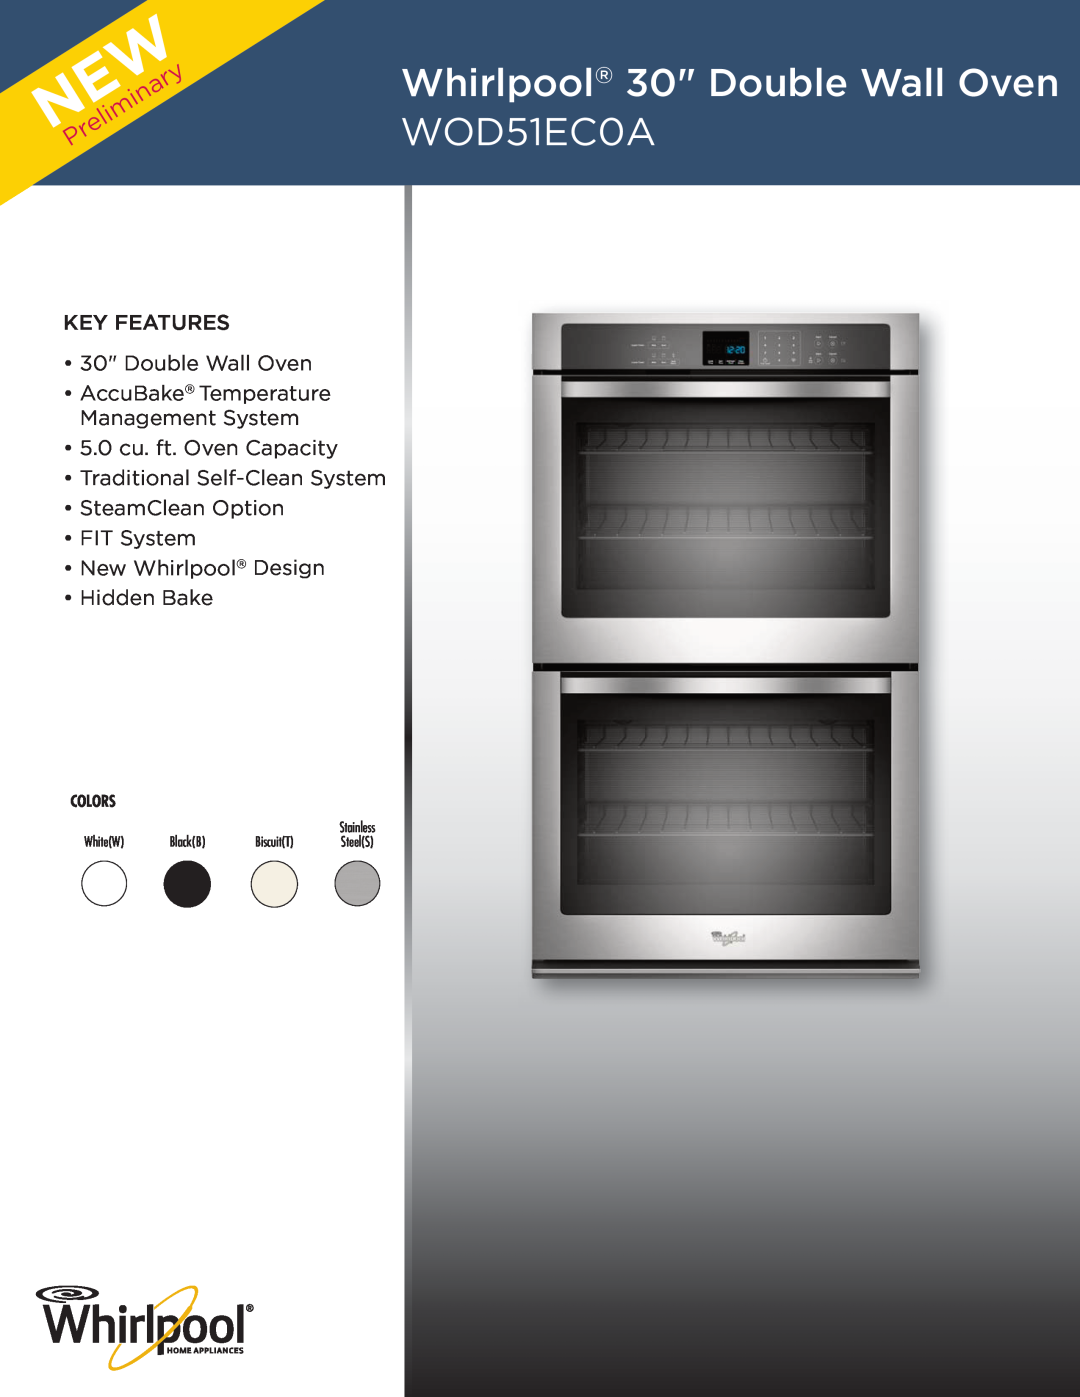 Whirlpool WOS51EC0A Whirlpool 30 Double Wall Oven WOD51EC0A, key features 30 Double Wall Oven, NEWPreliminary, Colors 